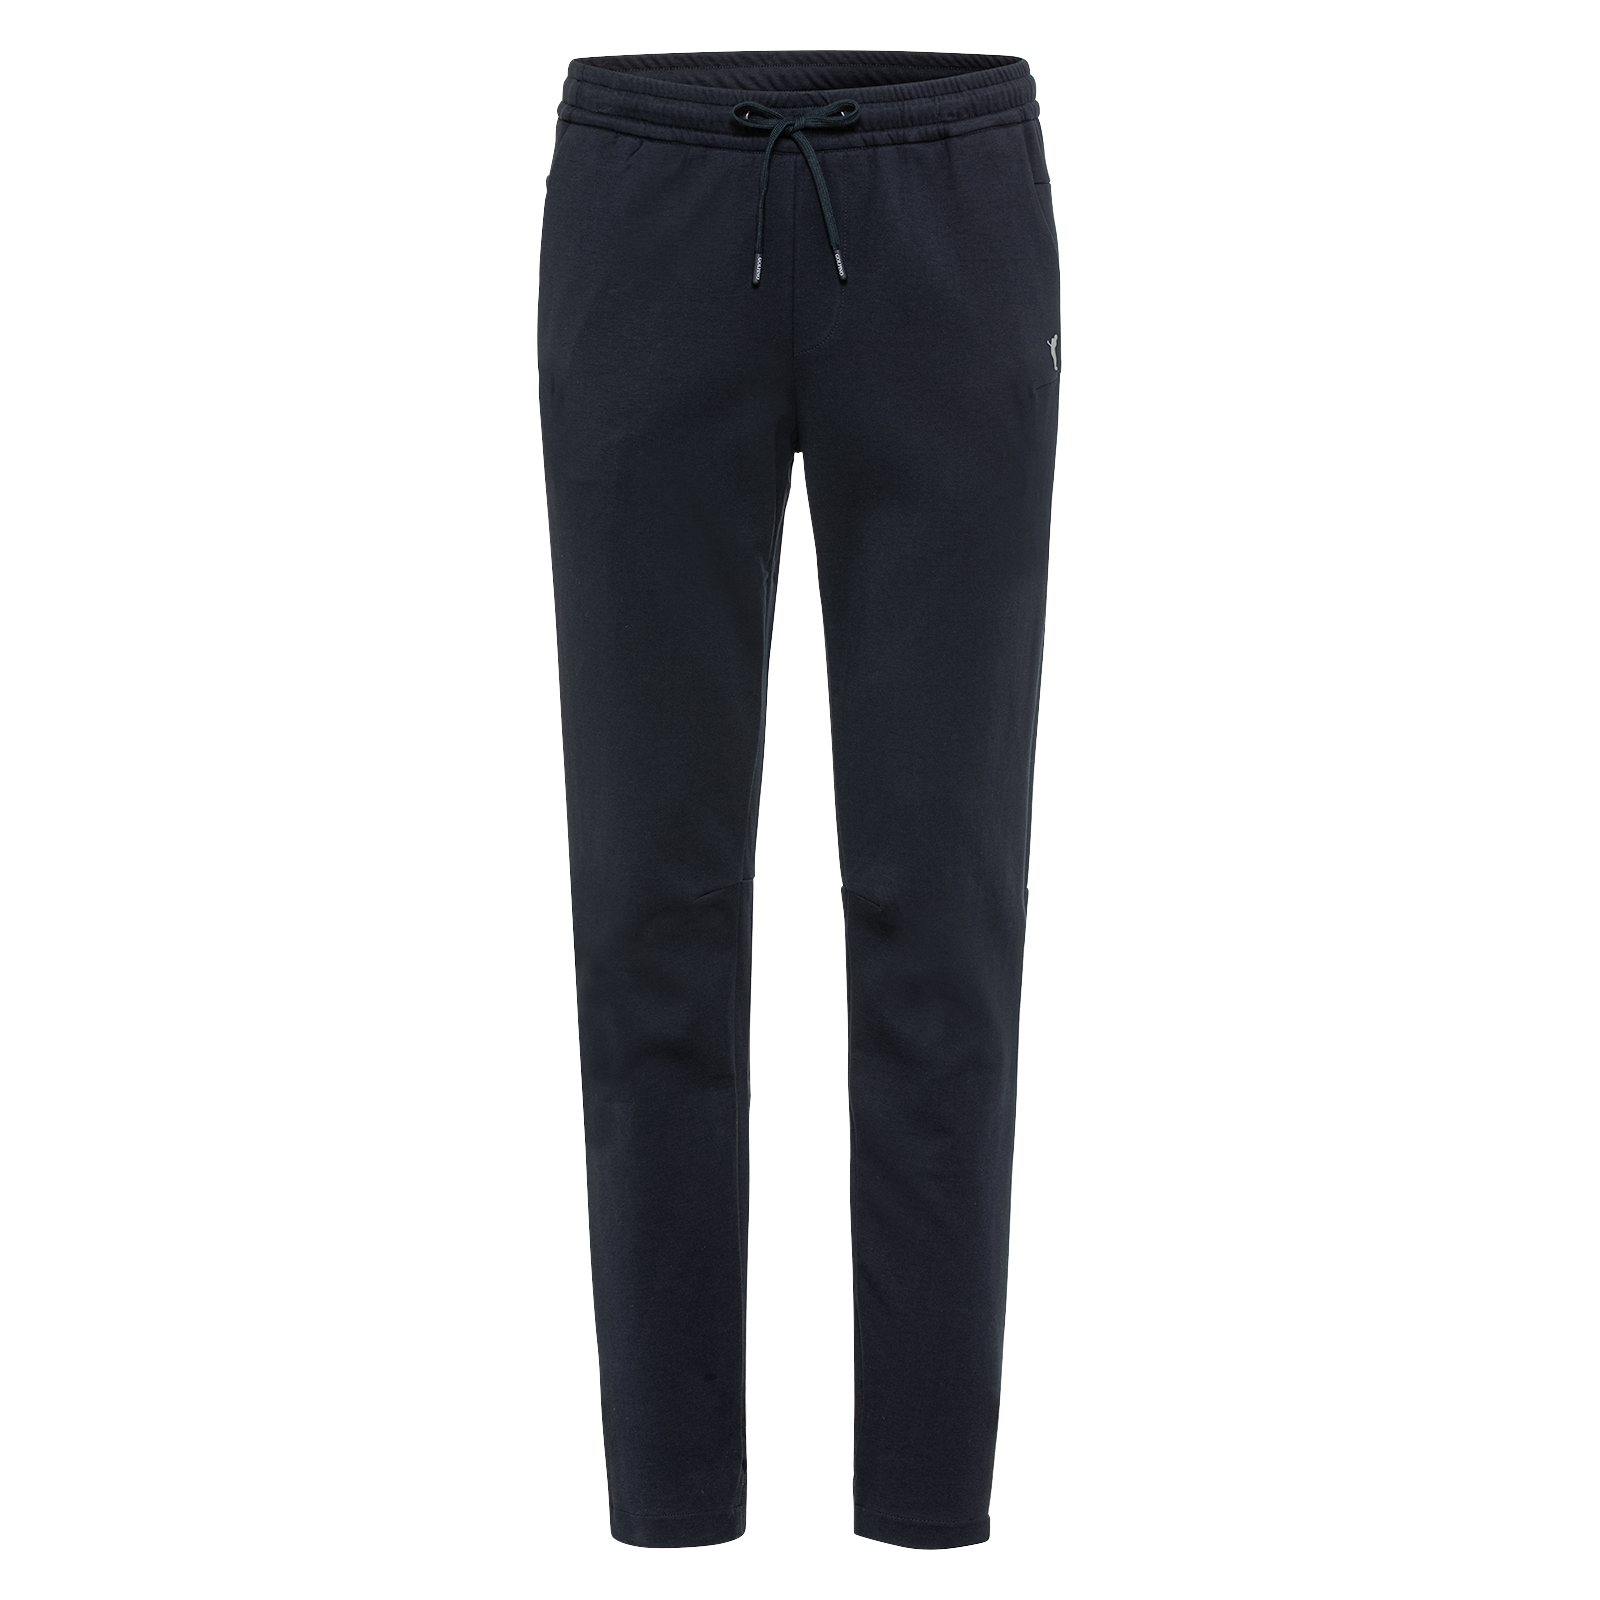 Men's casual stretch jogger-style trousers 